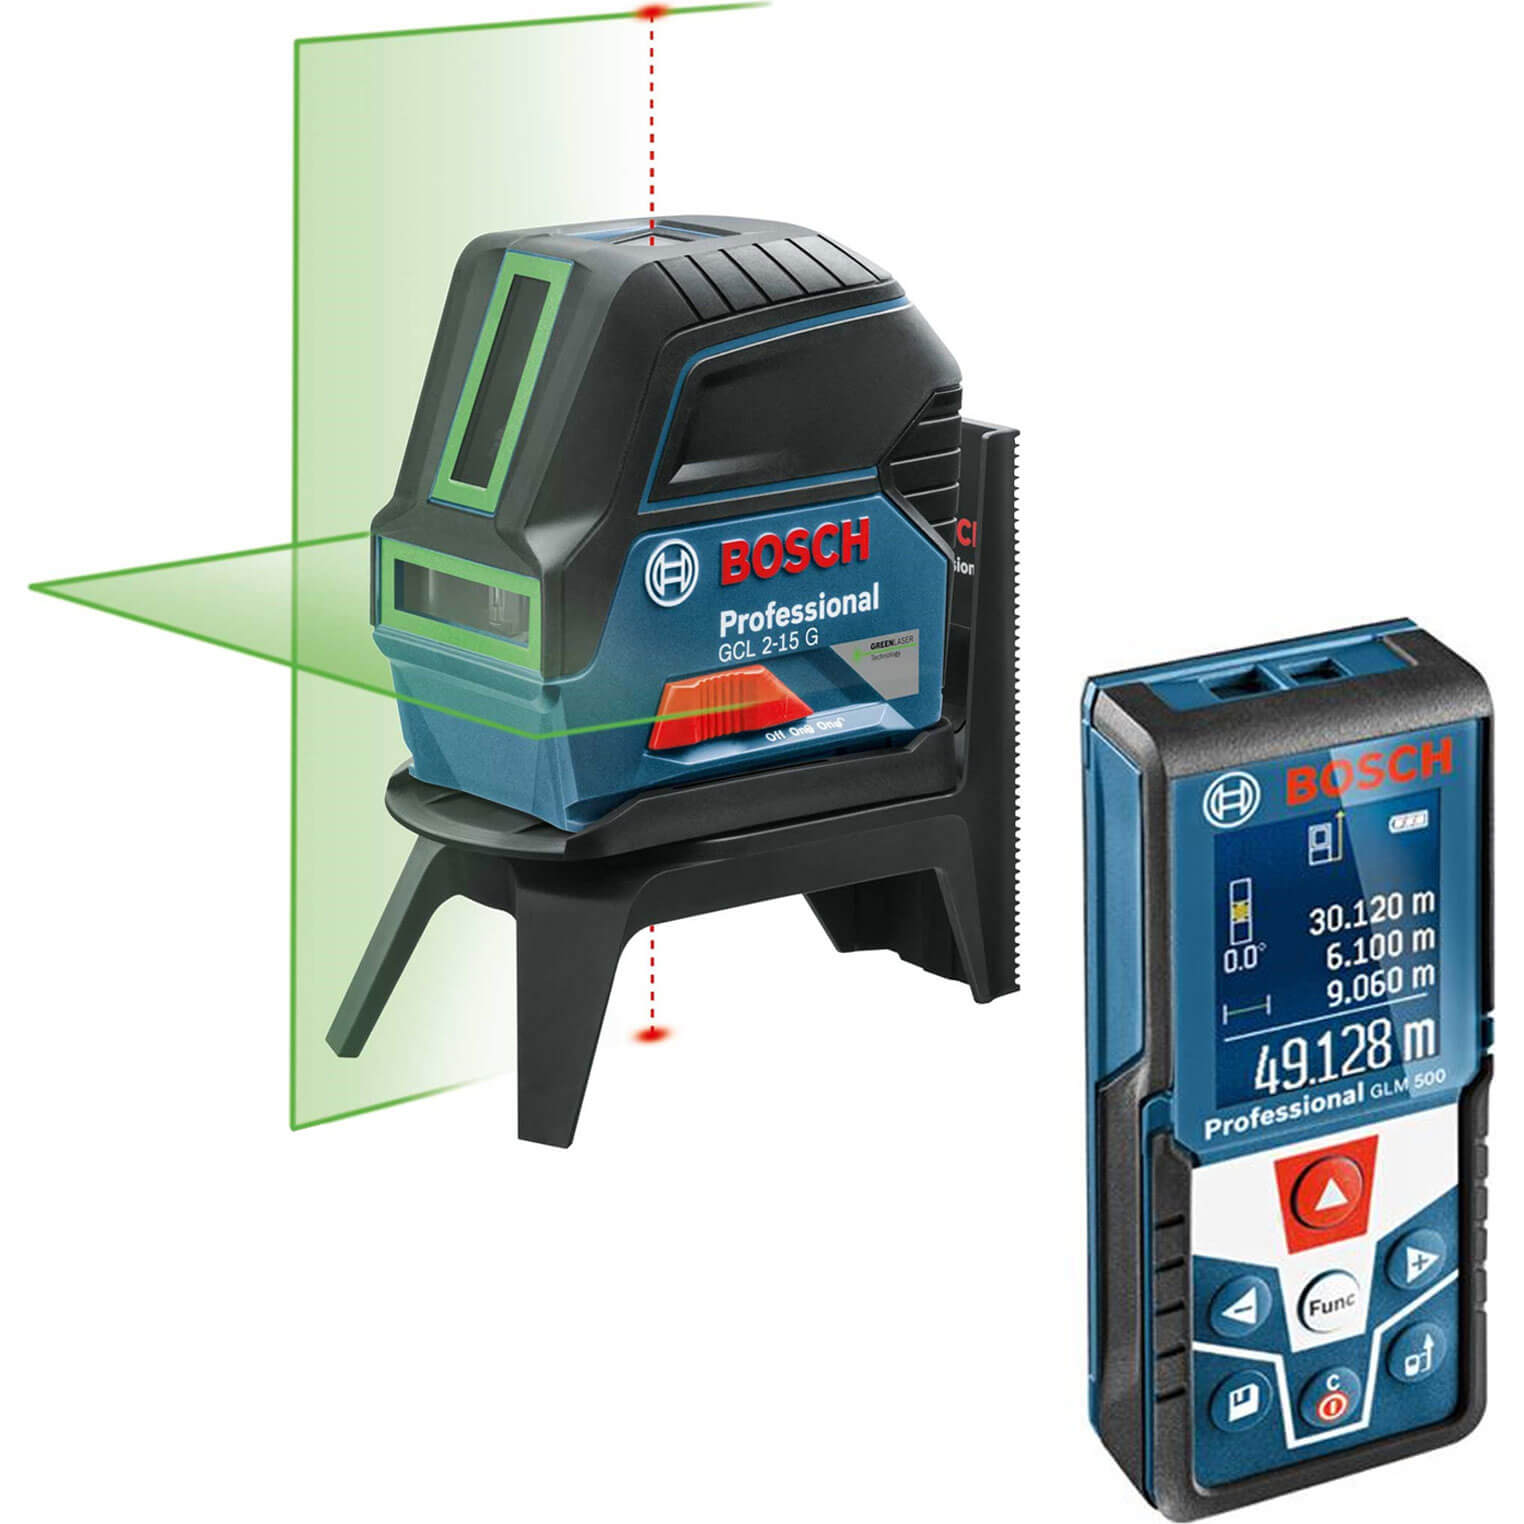 Photos - Laser Measuring Tool Bosch GCL 2-15 Green Self Levelling Laser level and GLM500 Laser Measure K 